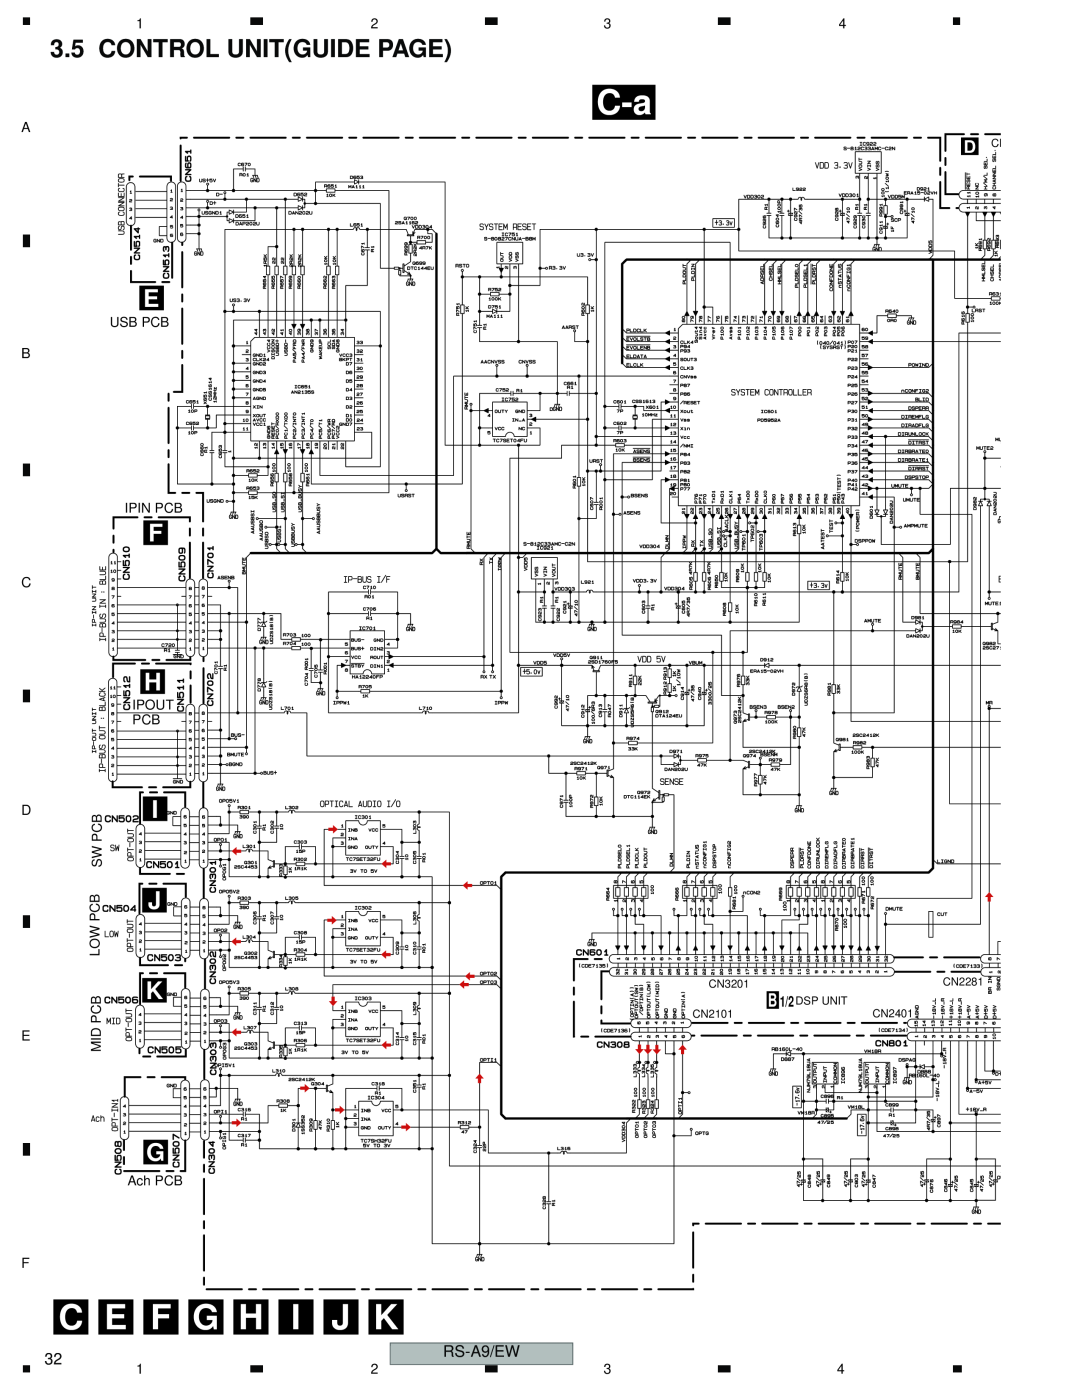 Pioneer RS-A9/EW manual Control Unitguide Page, D Cn 